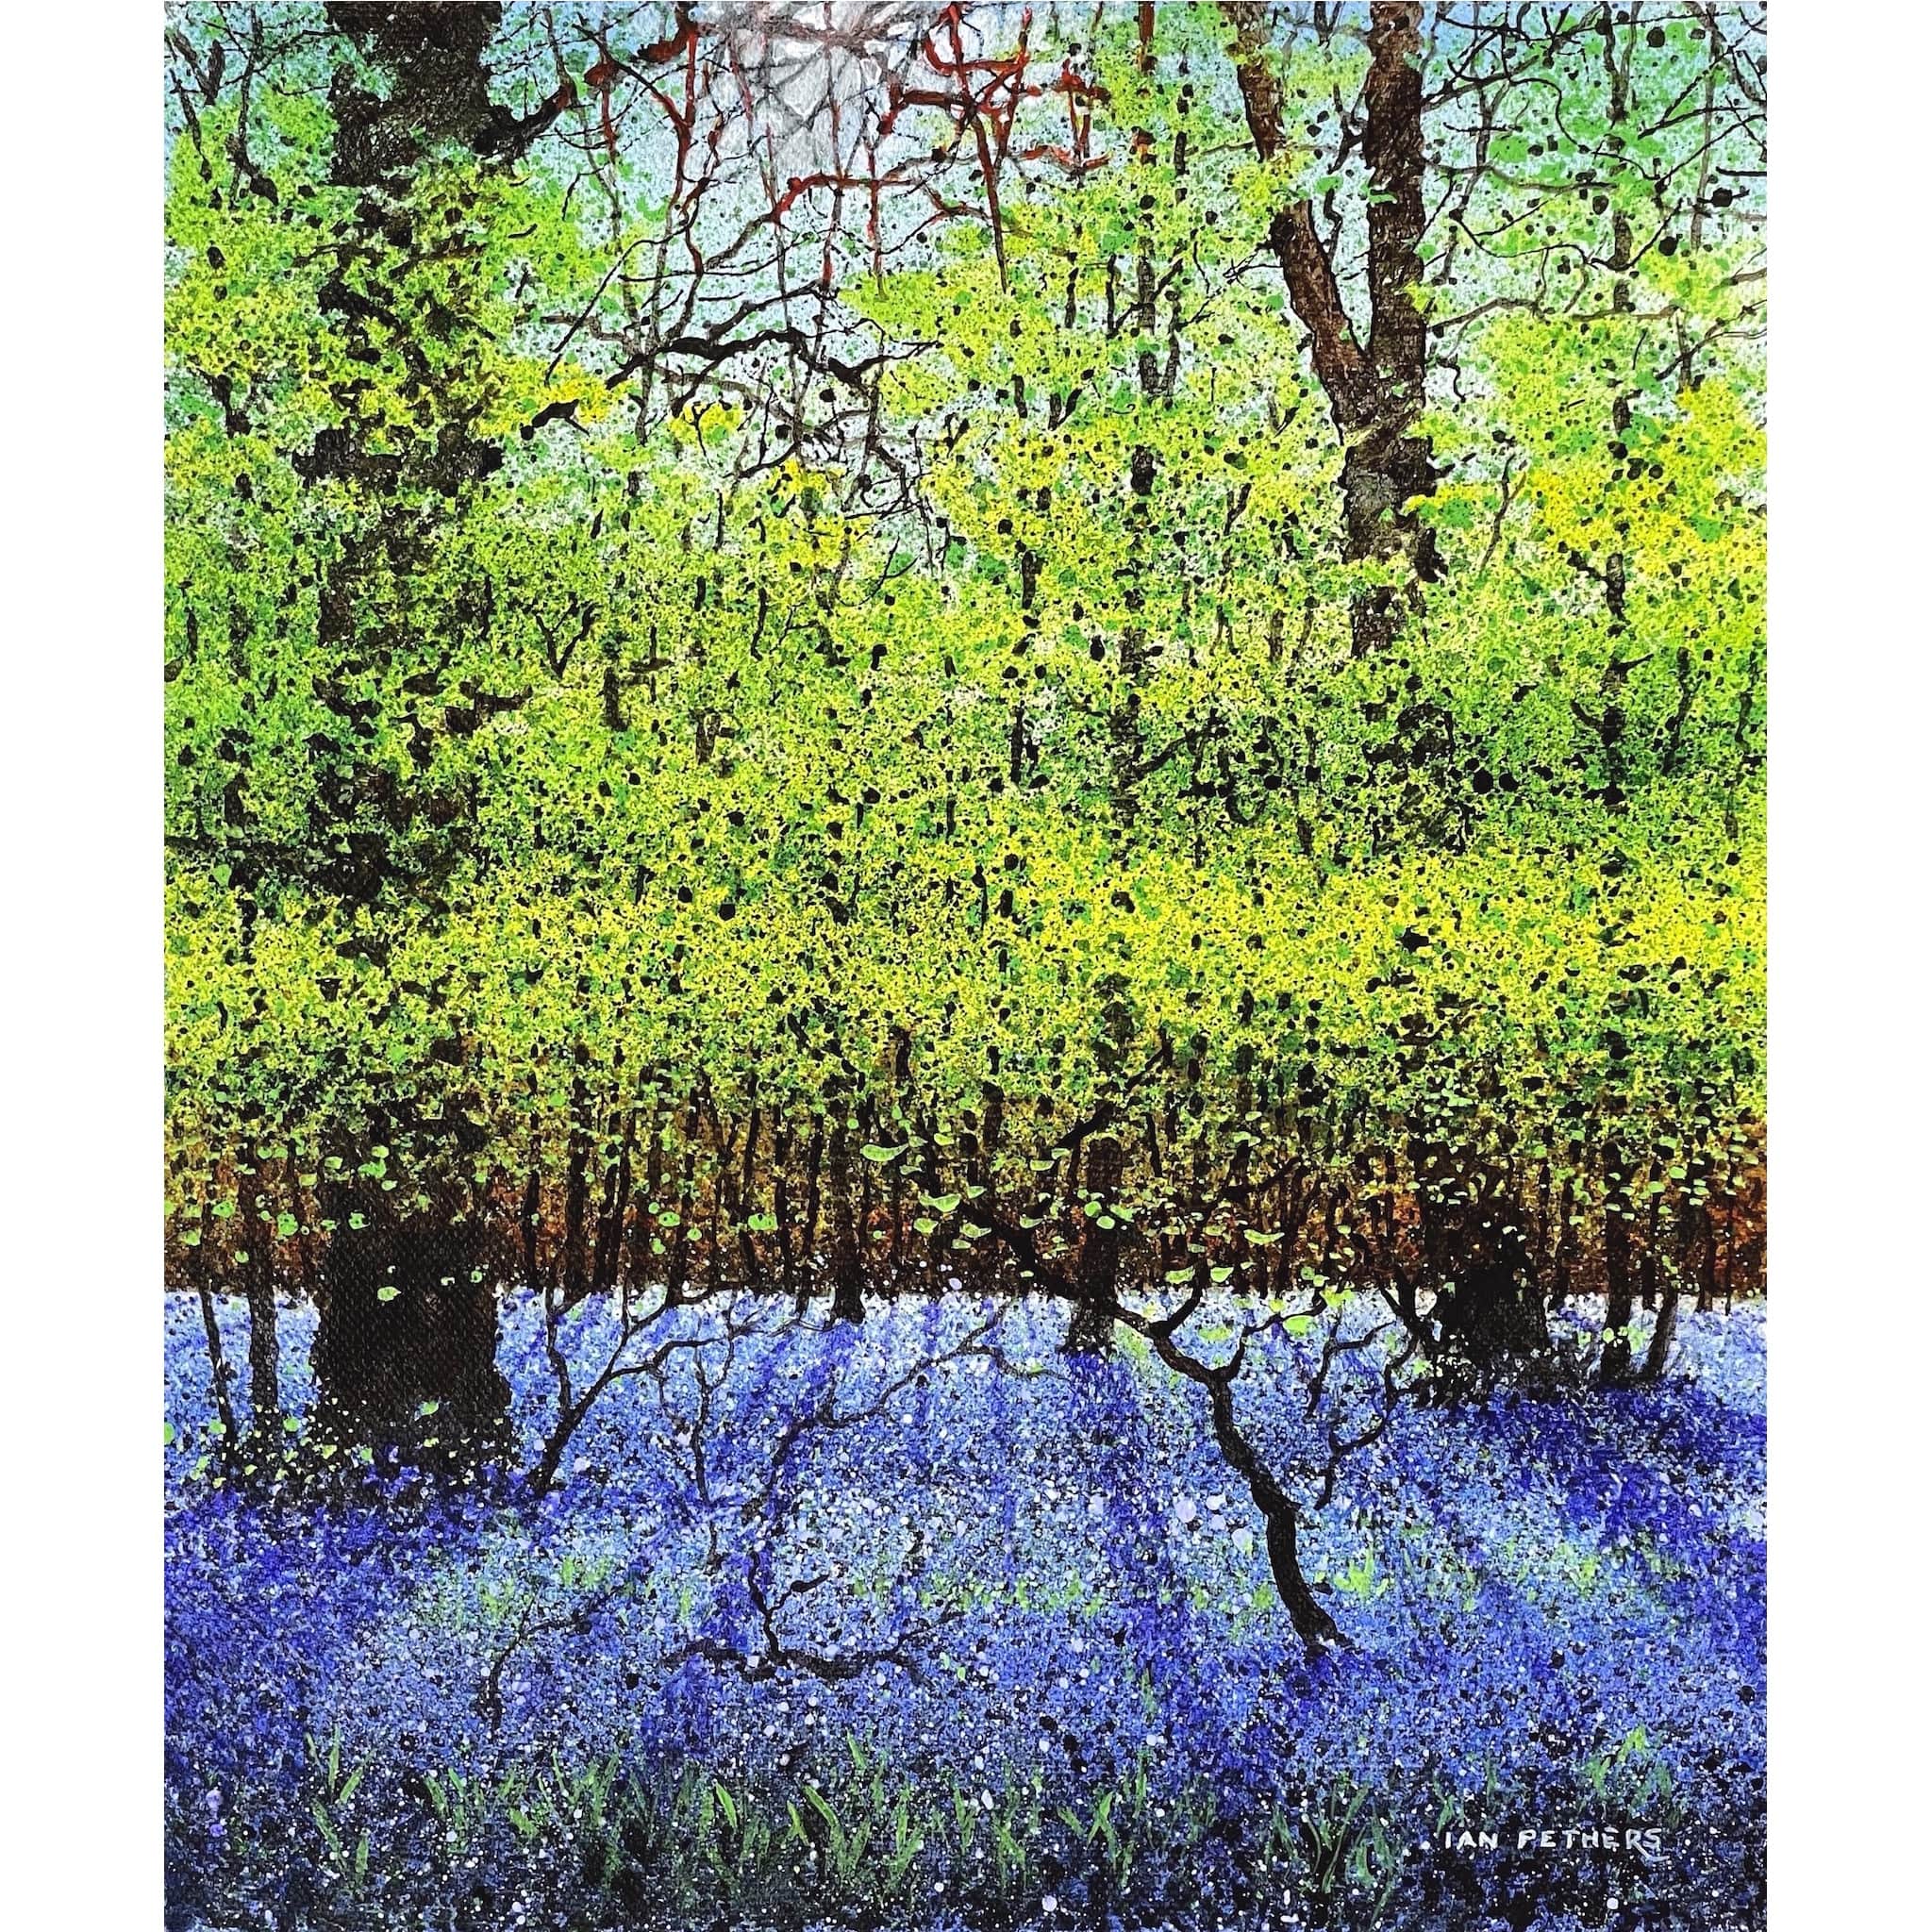 Painting of bluebells growing underneath trees by artist Ian Pethers